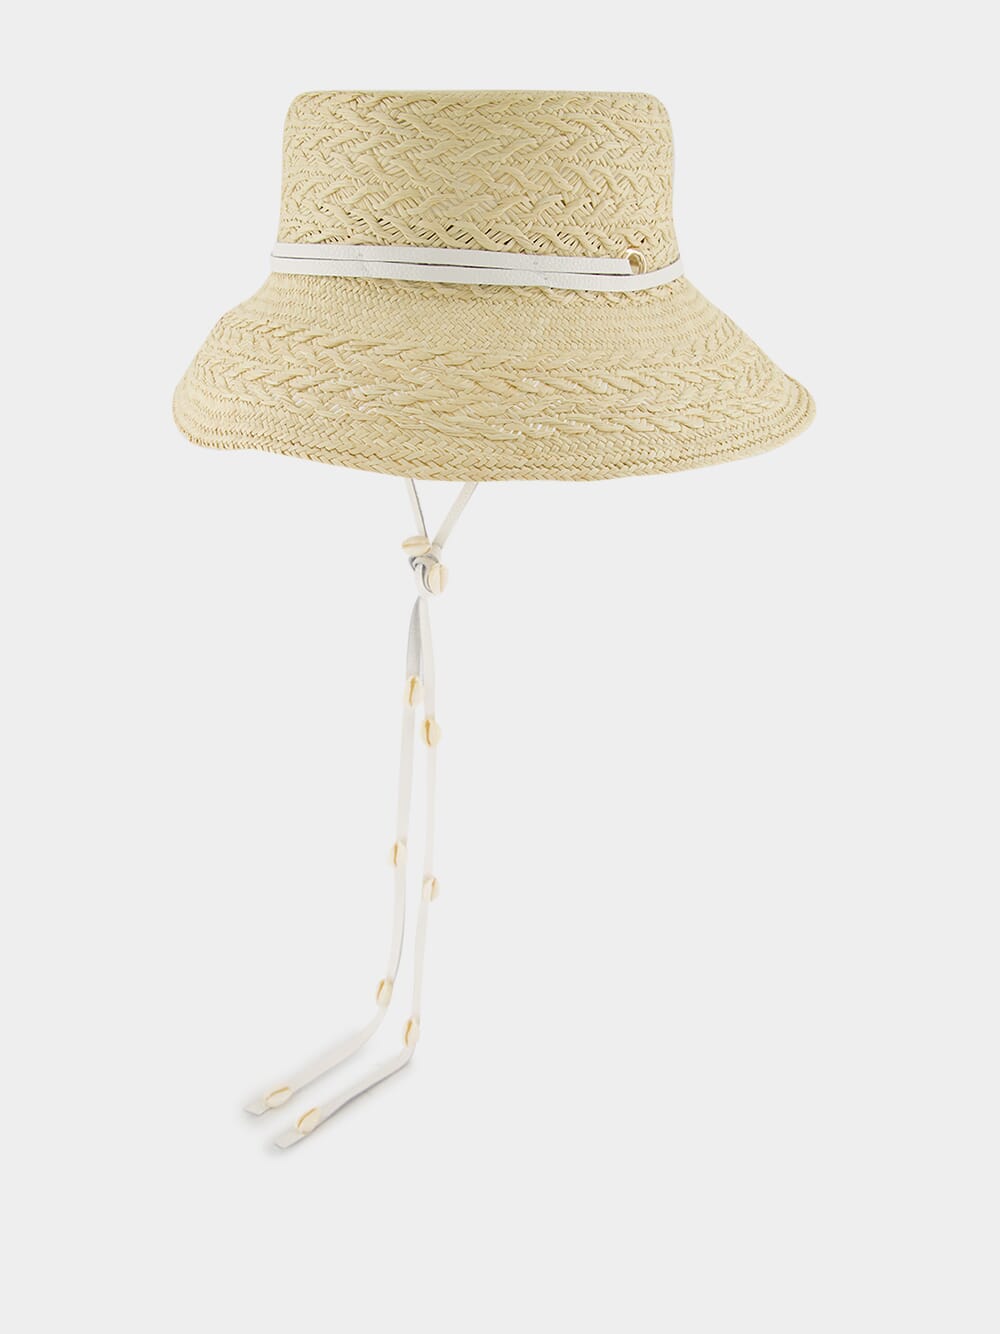 Texturized Straw Lampshade Hat with Leather Band